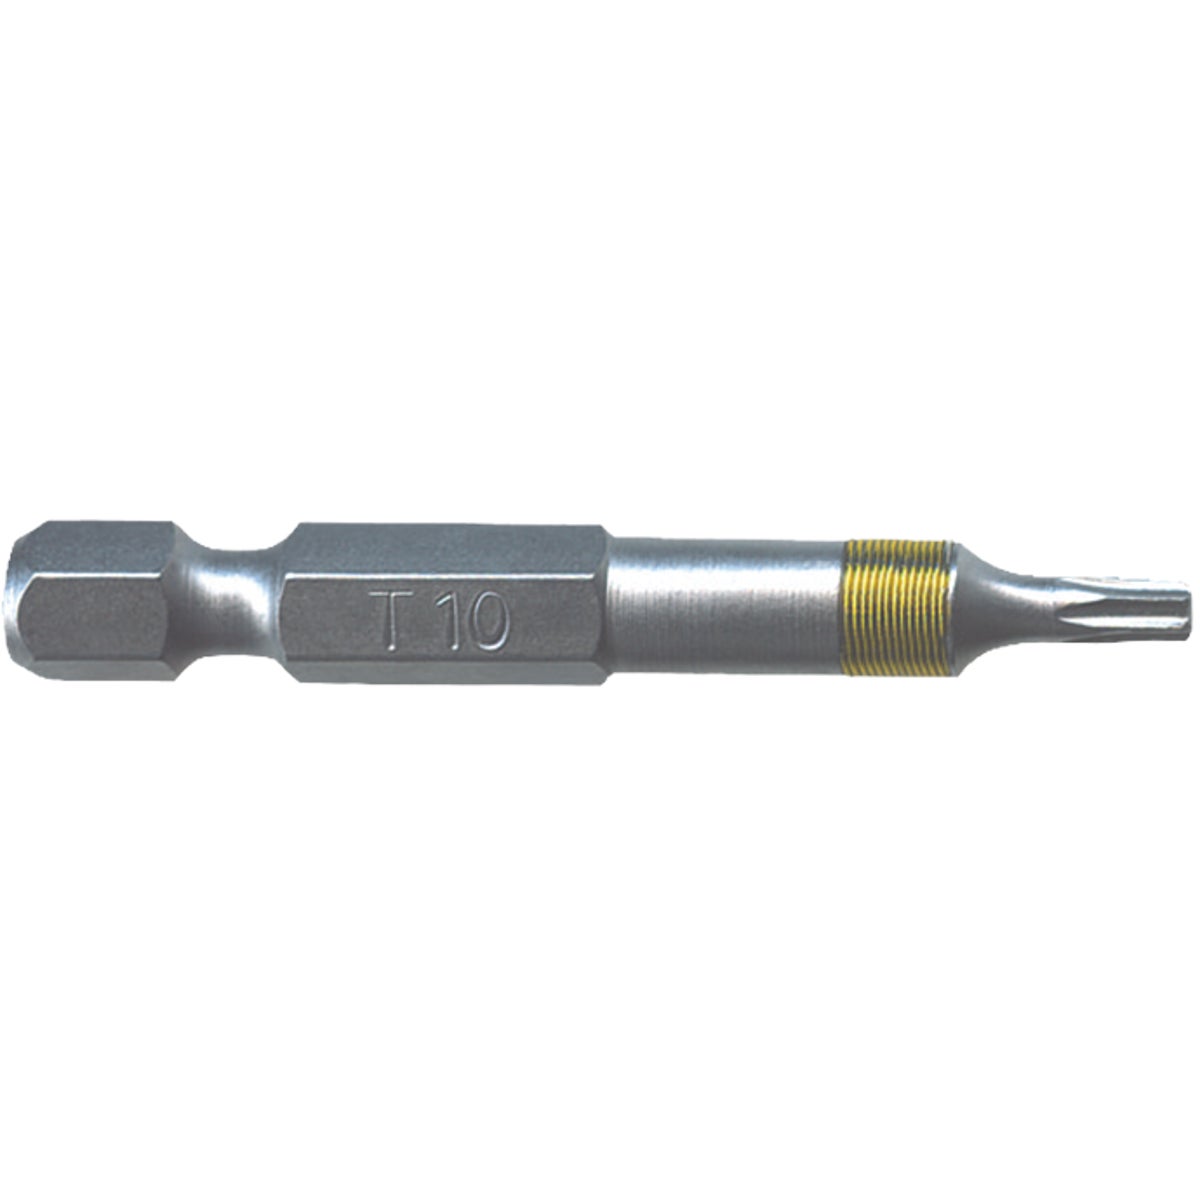 Item 201180, Star Drive Torx bits are used with various fasteners.